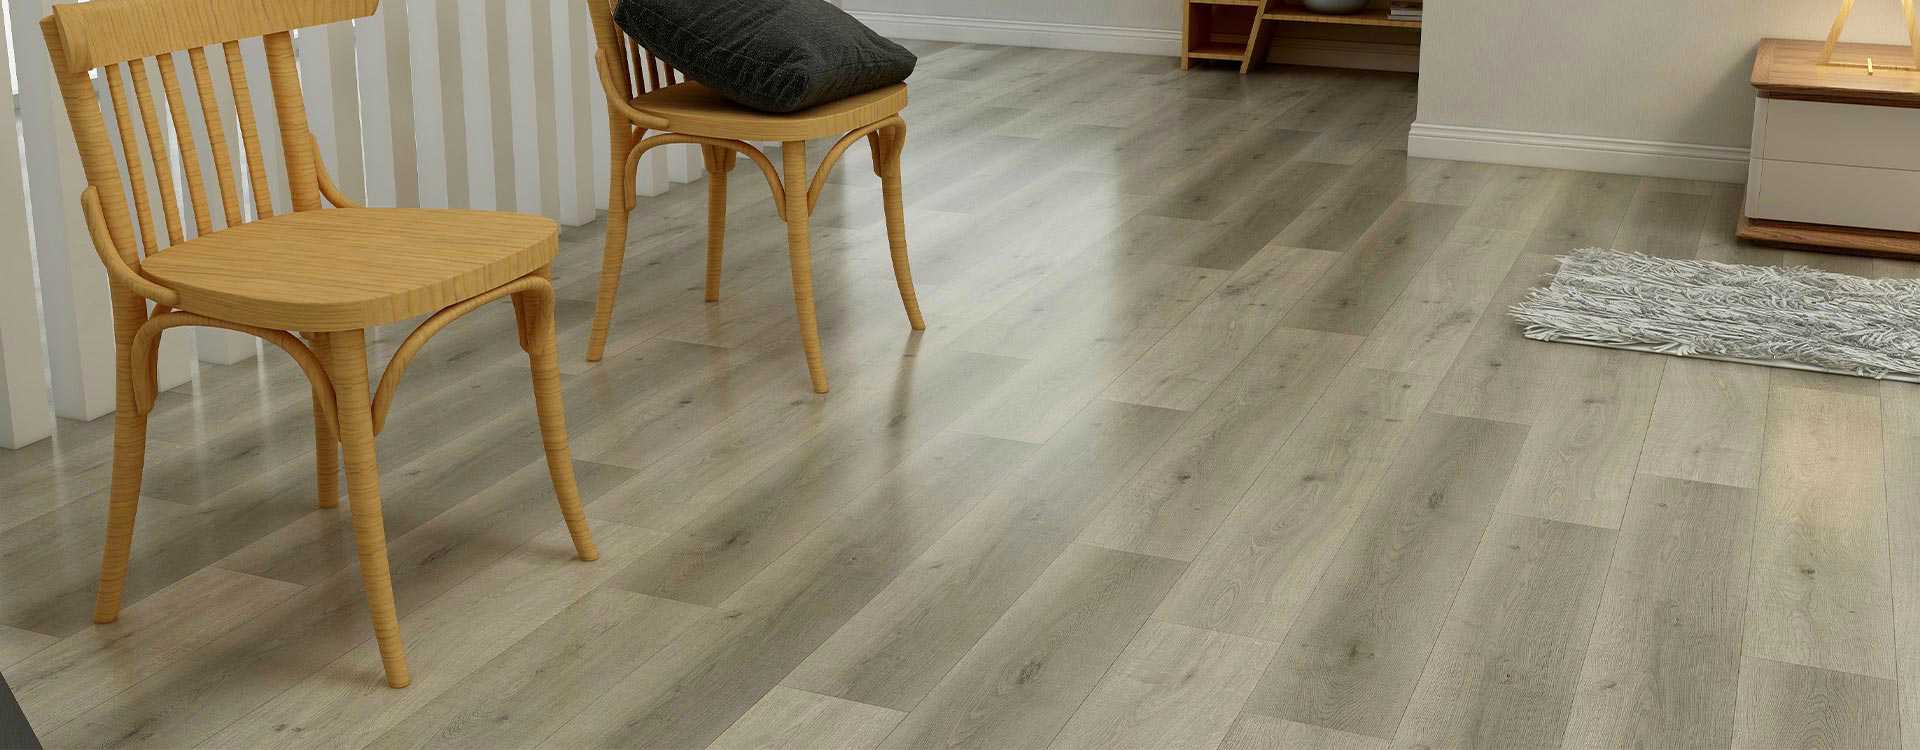 lvt patterned flooring provides a quiet walking experience